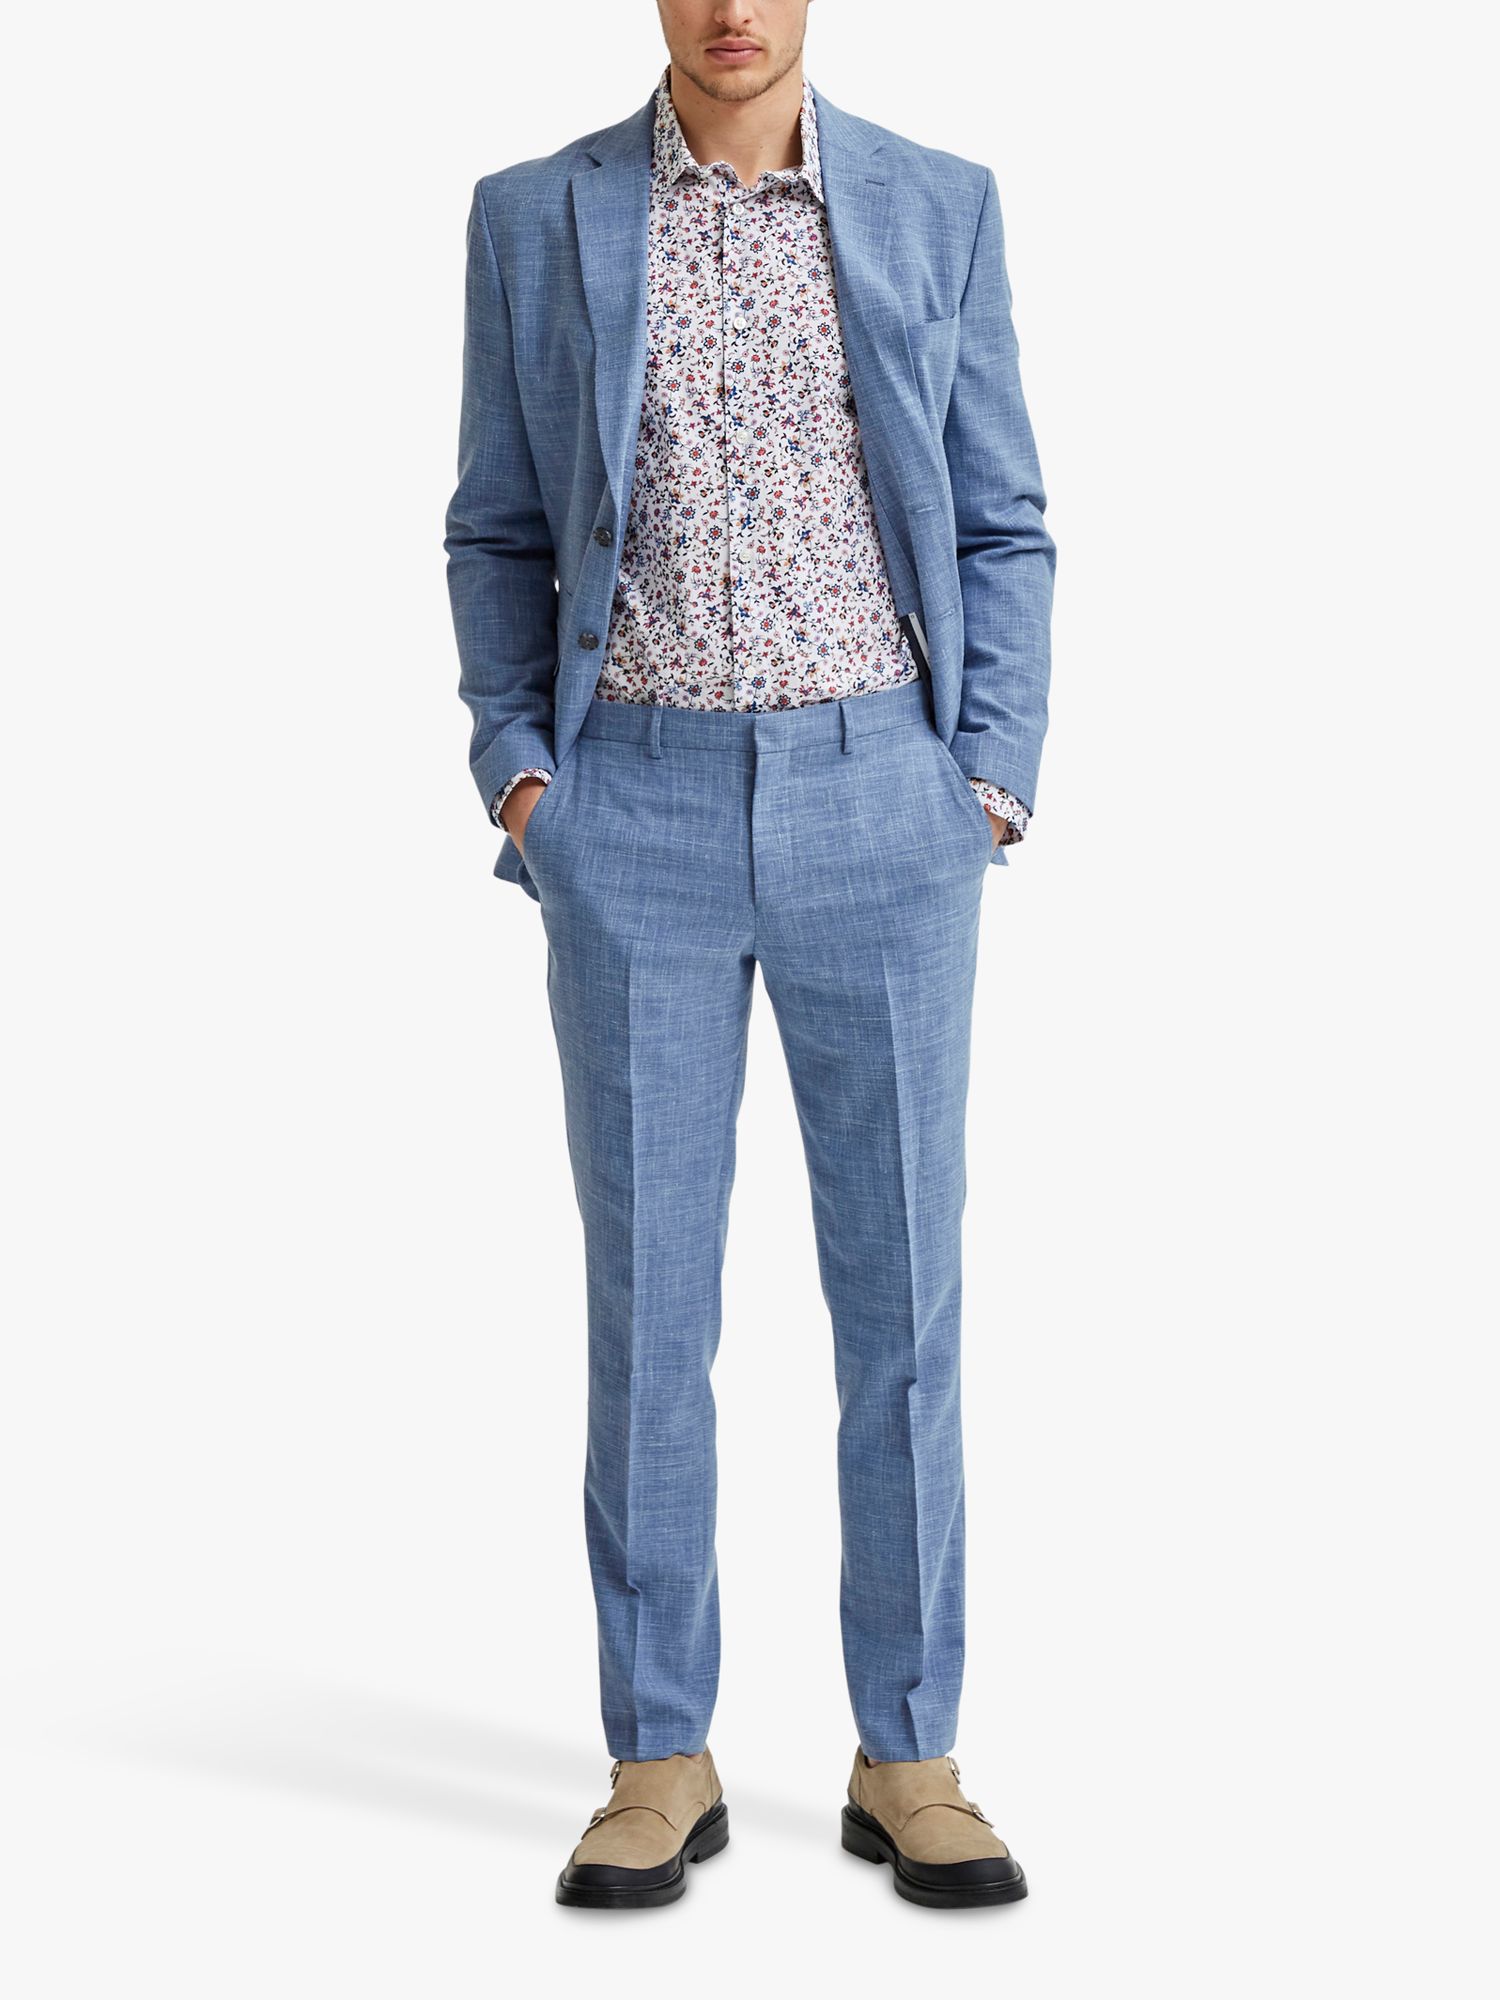 Buy SELECTED HOMME Linen Blend Trousers Online at johnlewis.com